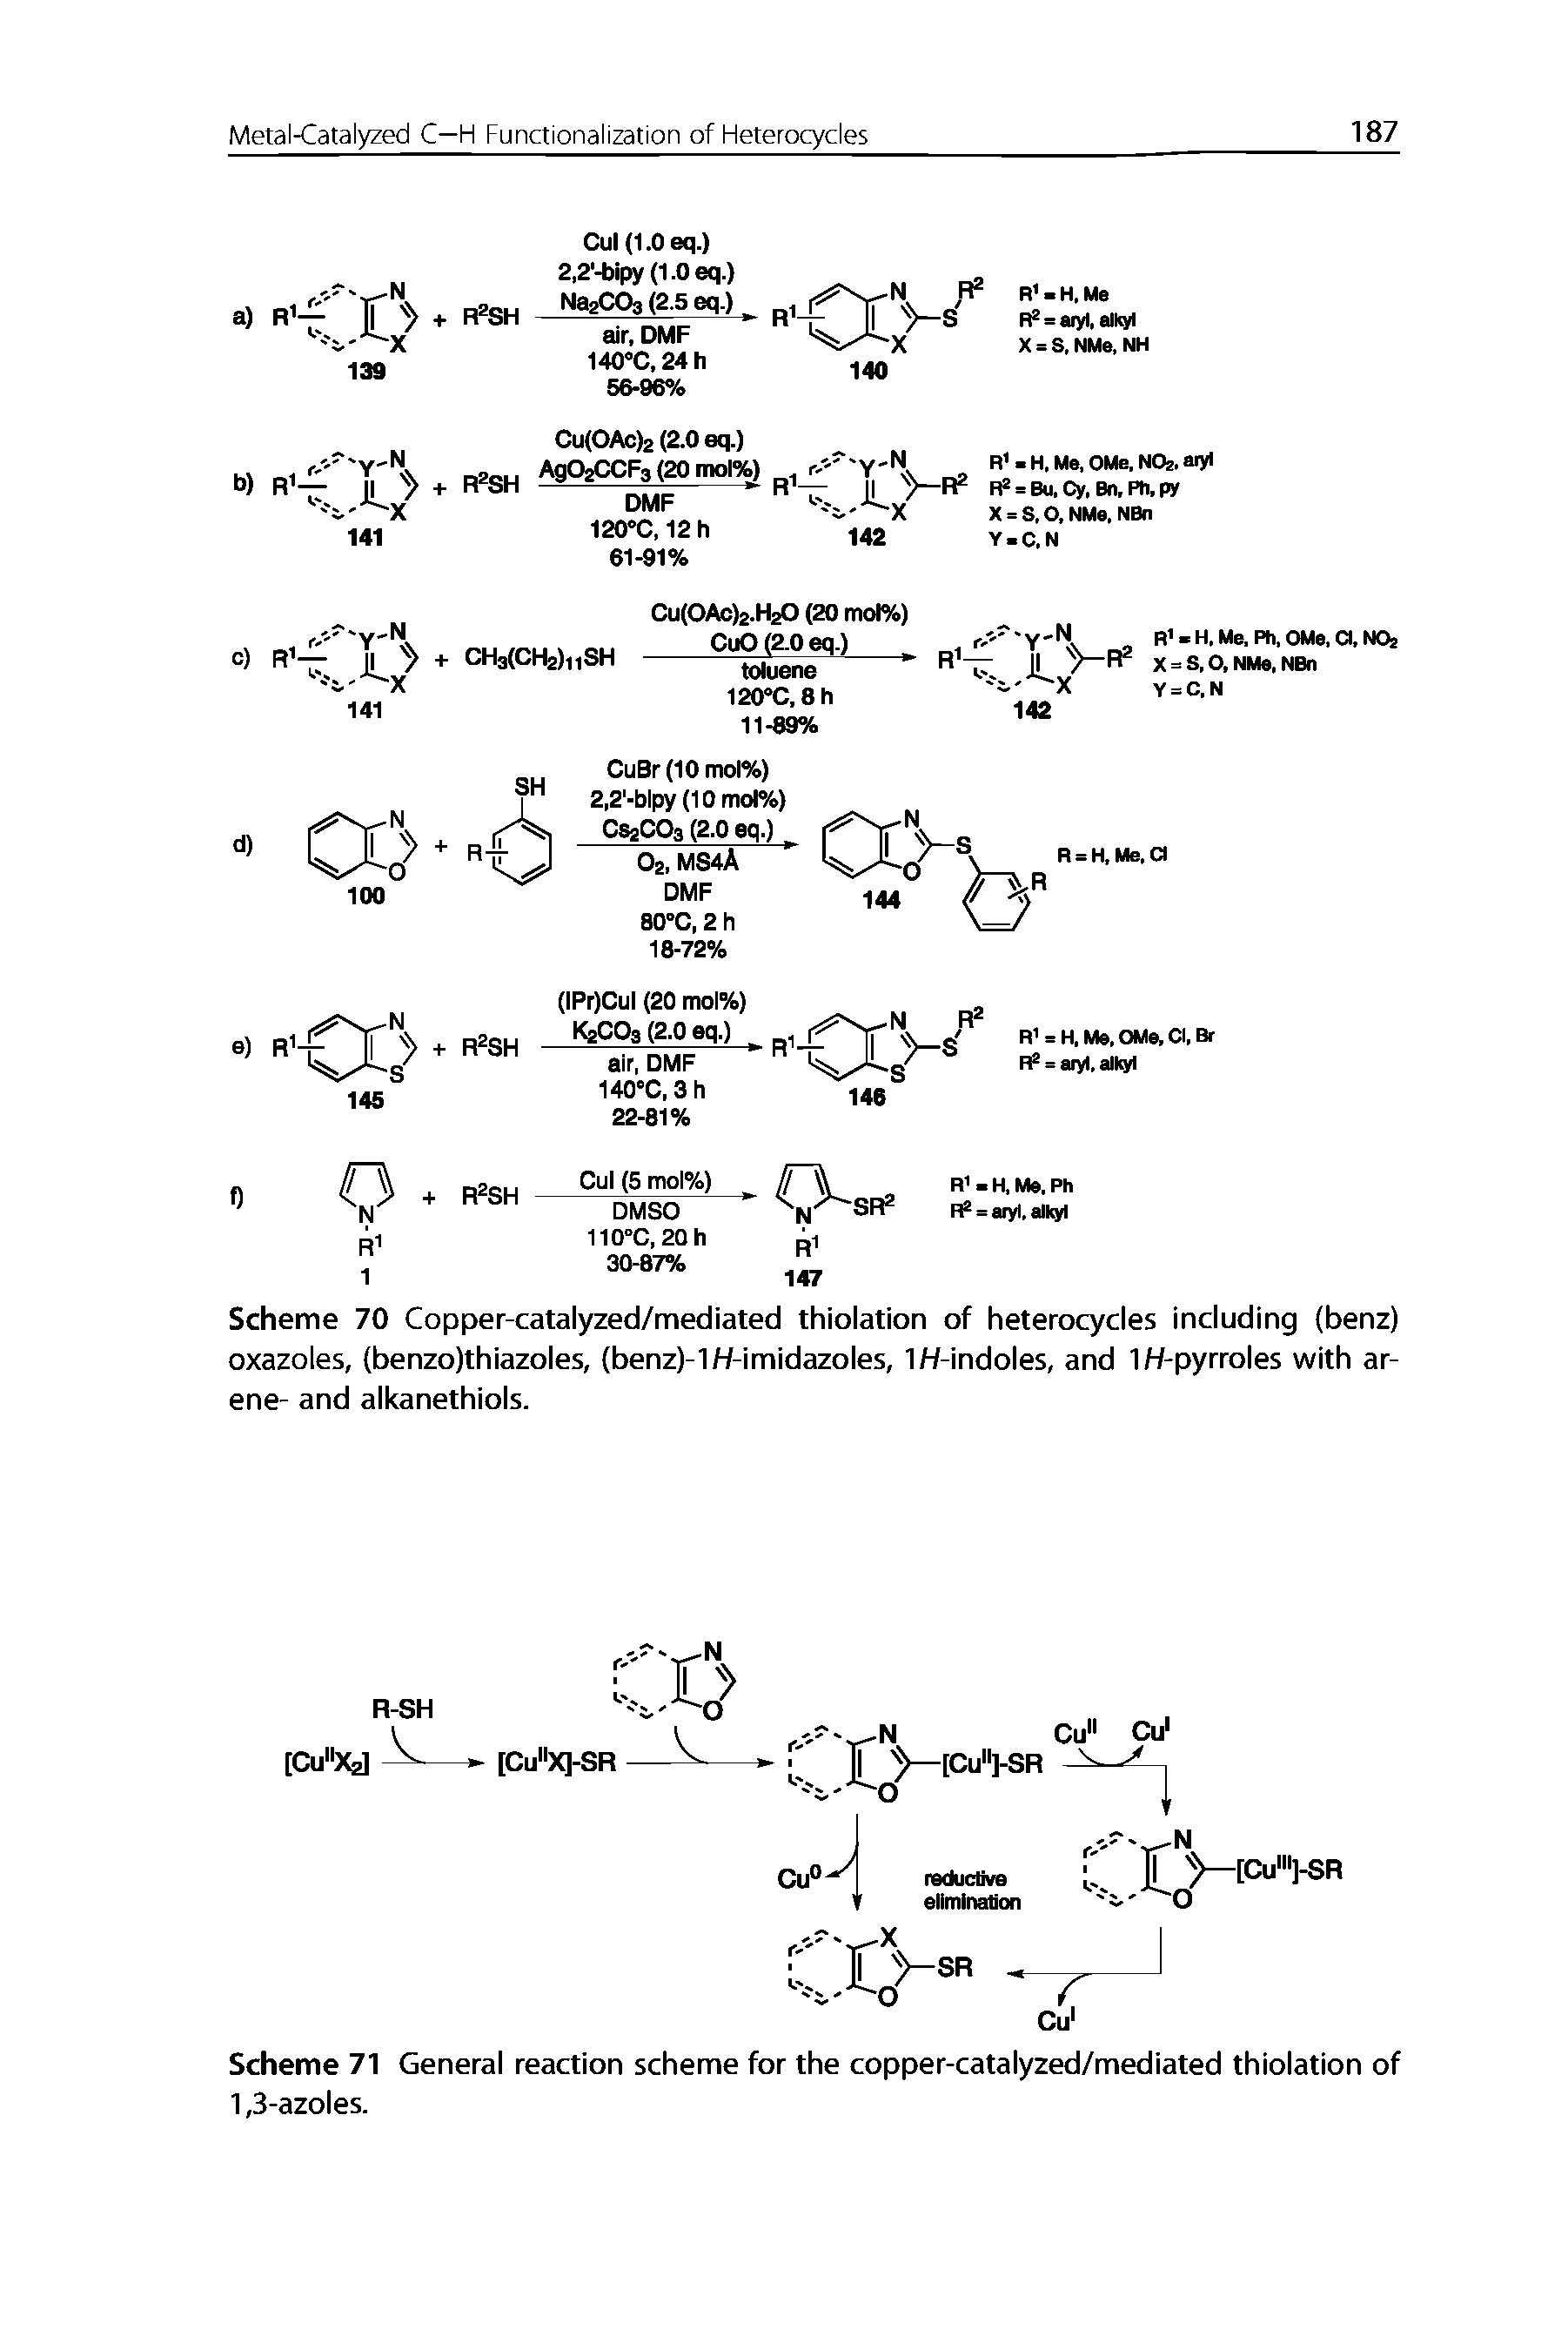 Scheme 70 Copper-catalyzed/mediated thiolation of heterocycles including (benz) oxazoles, (benzo)thiazoles, (benz)-1H-imidazoles, IH-indoles, and IH-pyrroles with ar-ene- and alkanethiols.